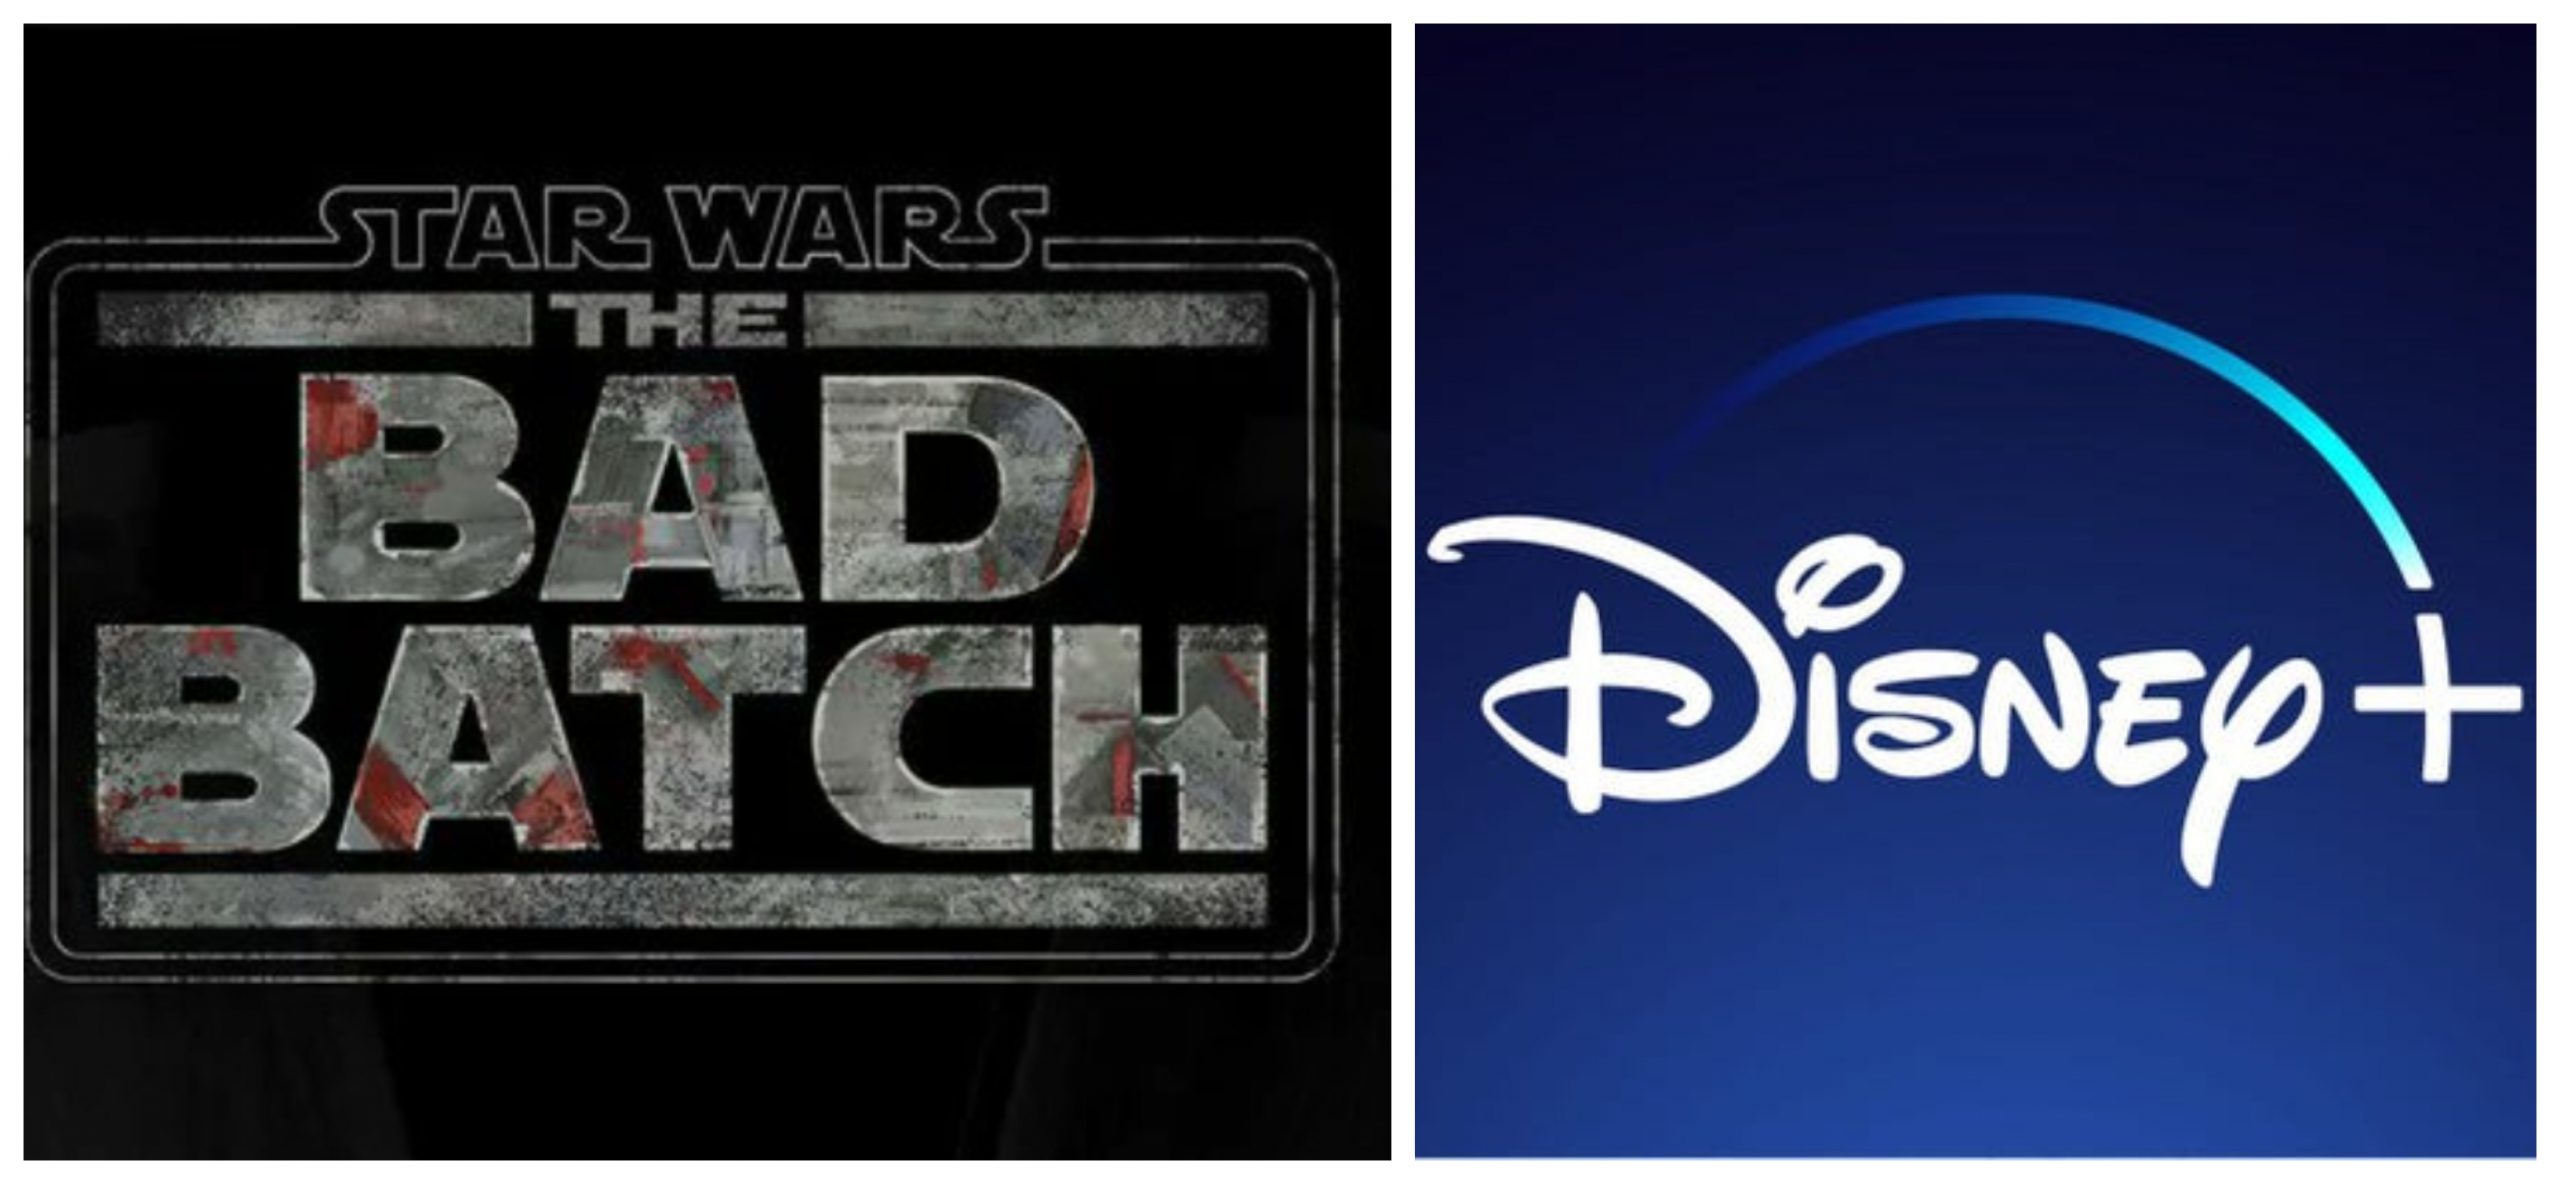 Star Wars The Bad Batch Animated Series coming to Disney+